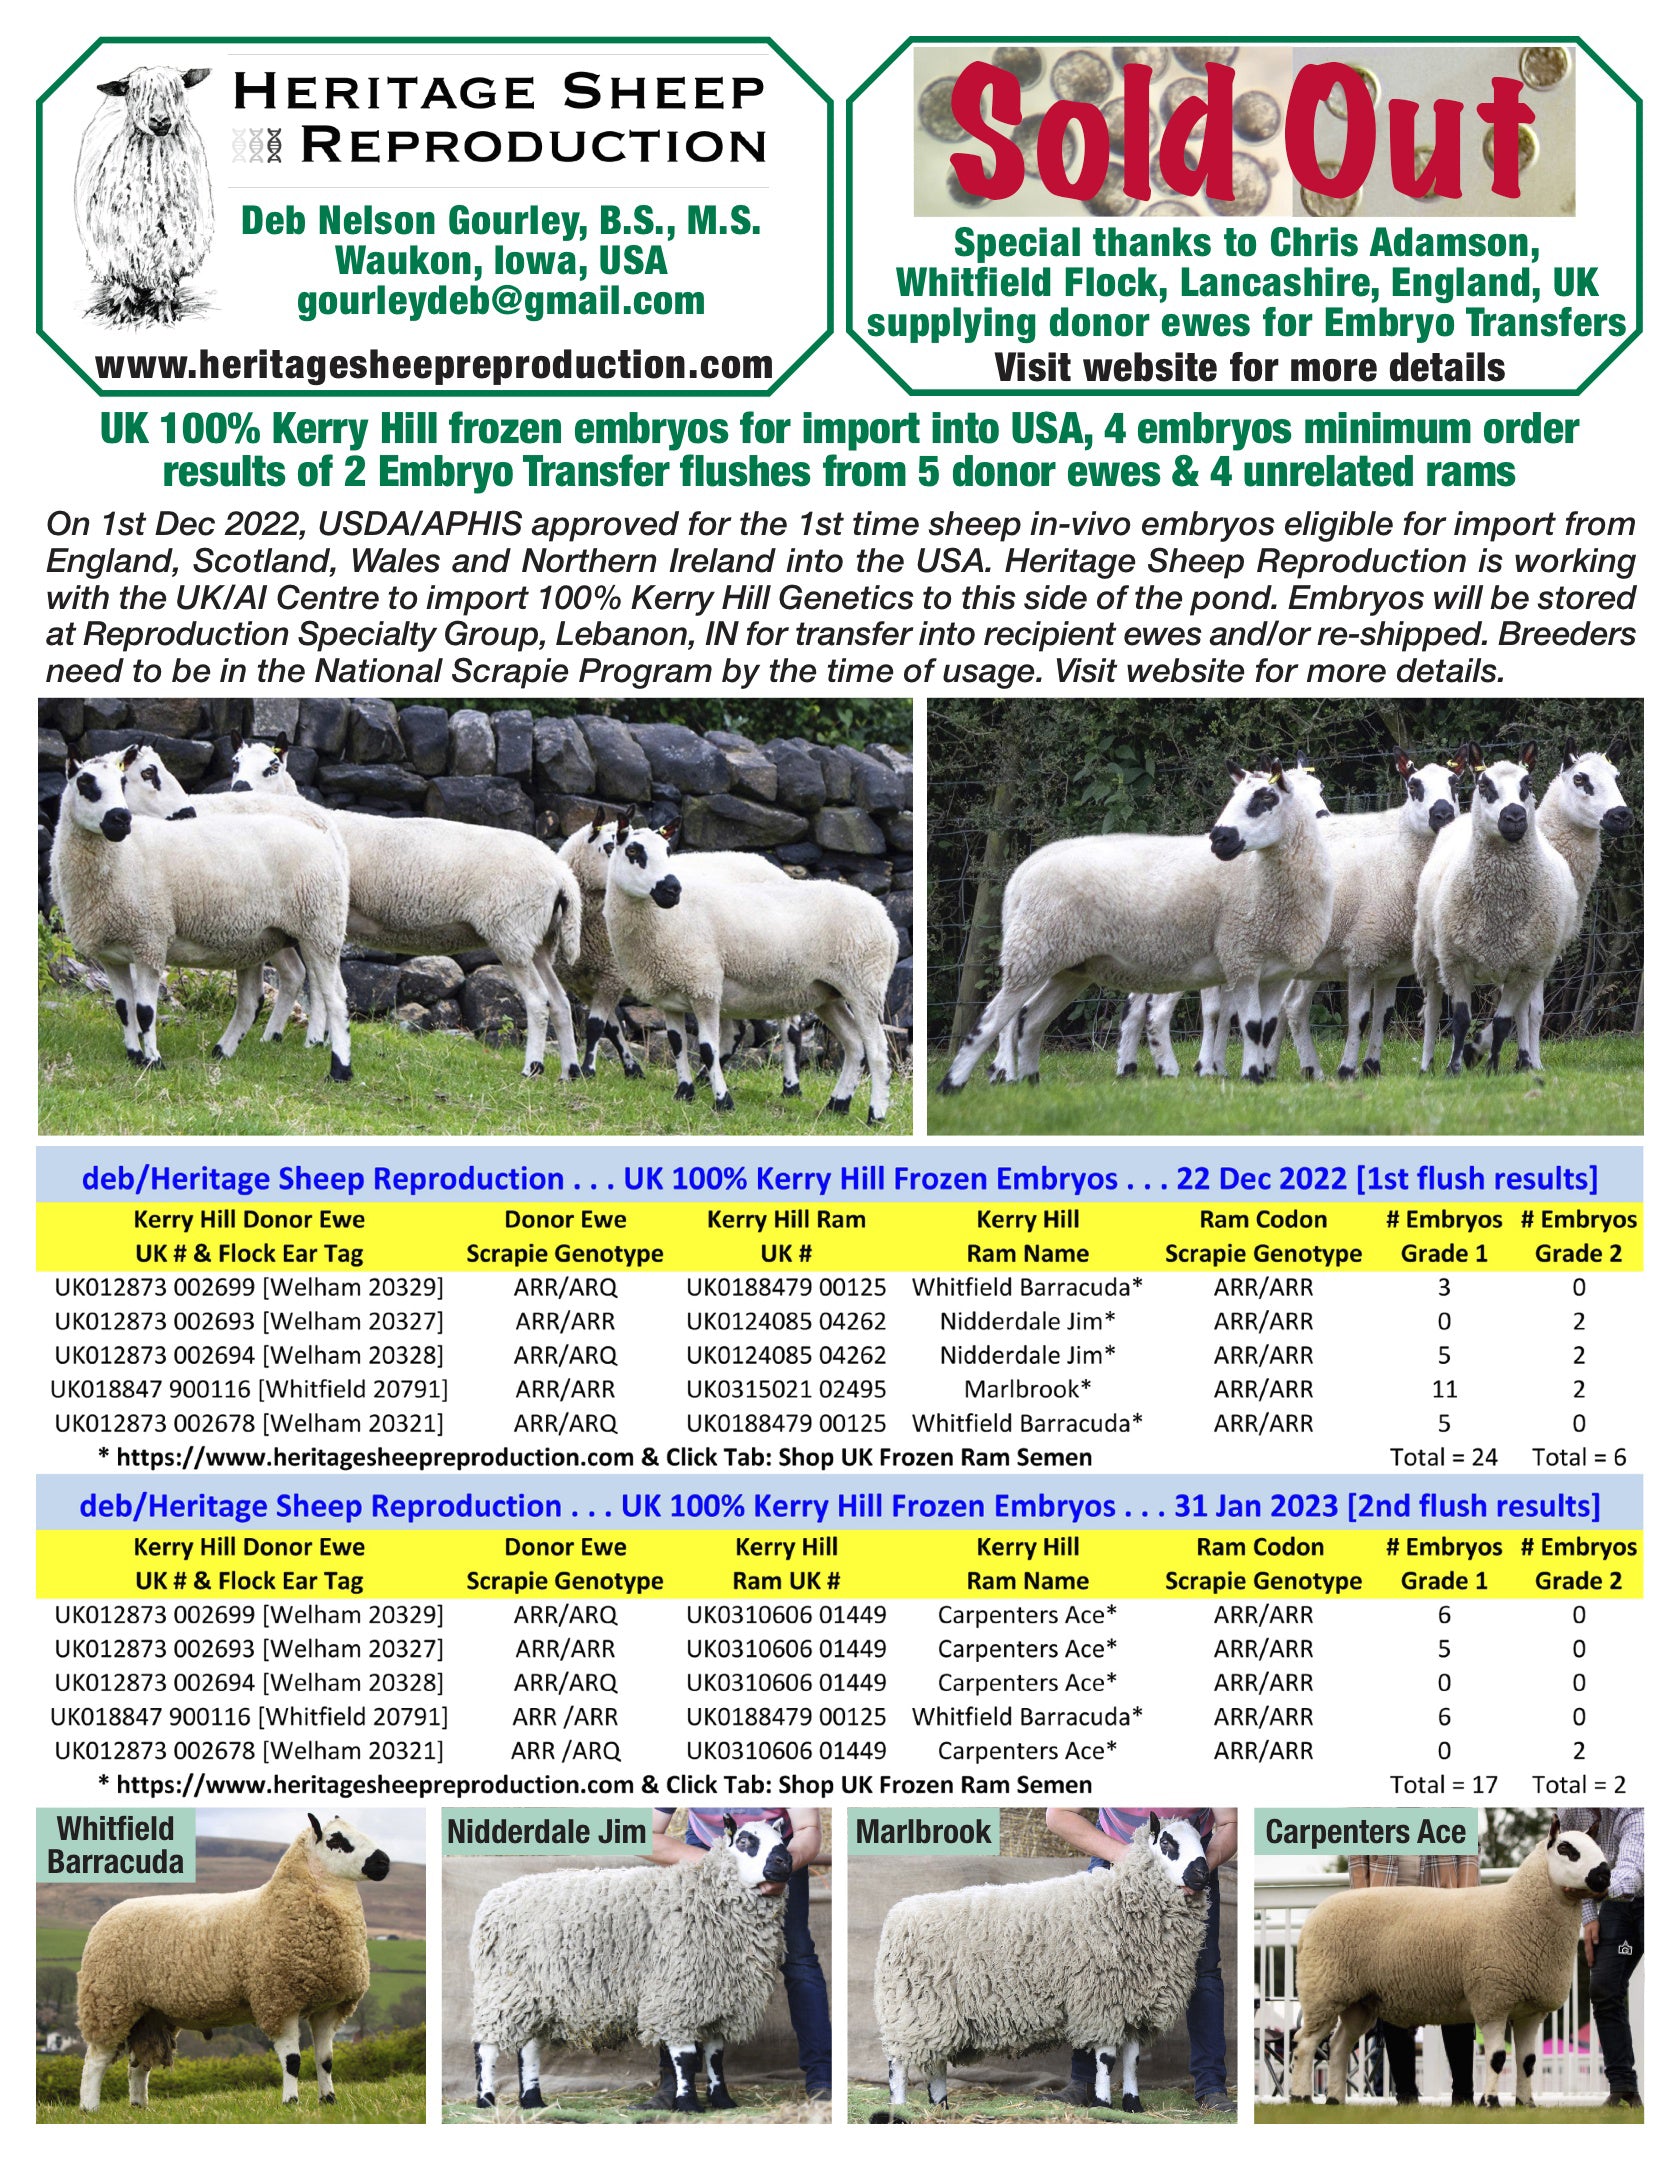 Kerry Hill 100% UK Embryos from 5 Donor Ewes & 4 Rams - Tank #6 - Embryos Imported into USA - Sold Out